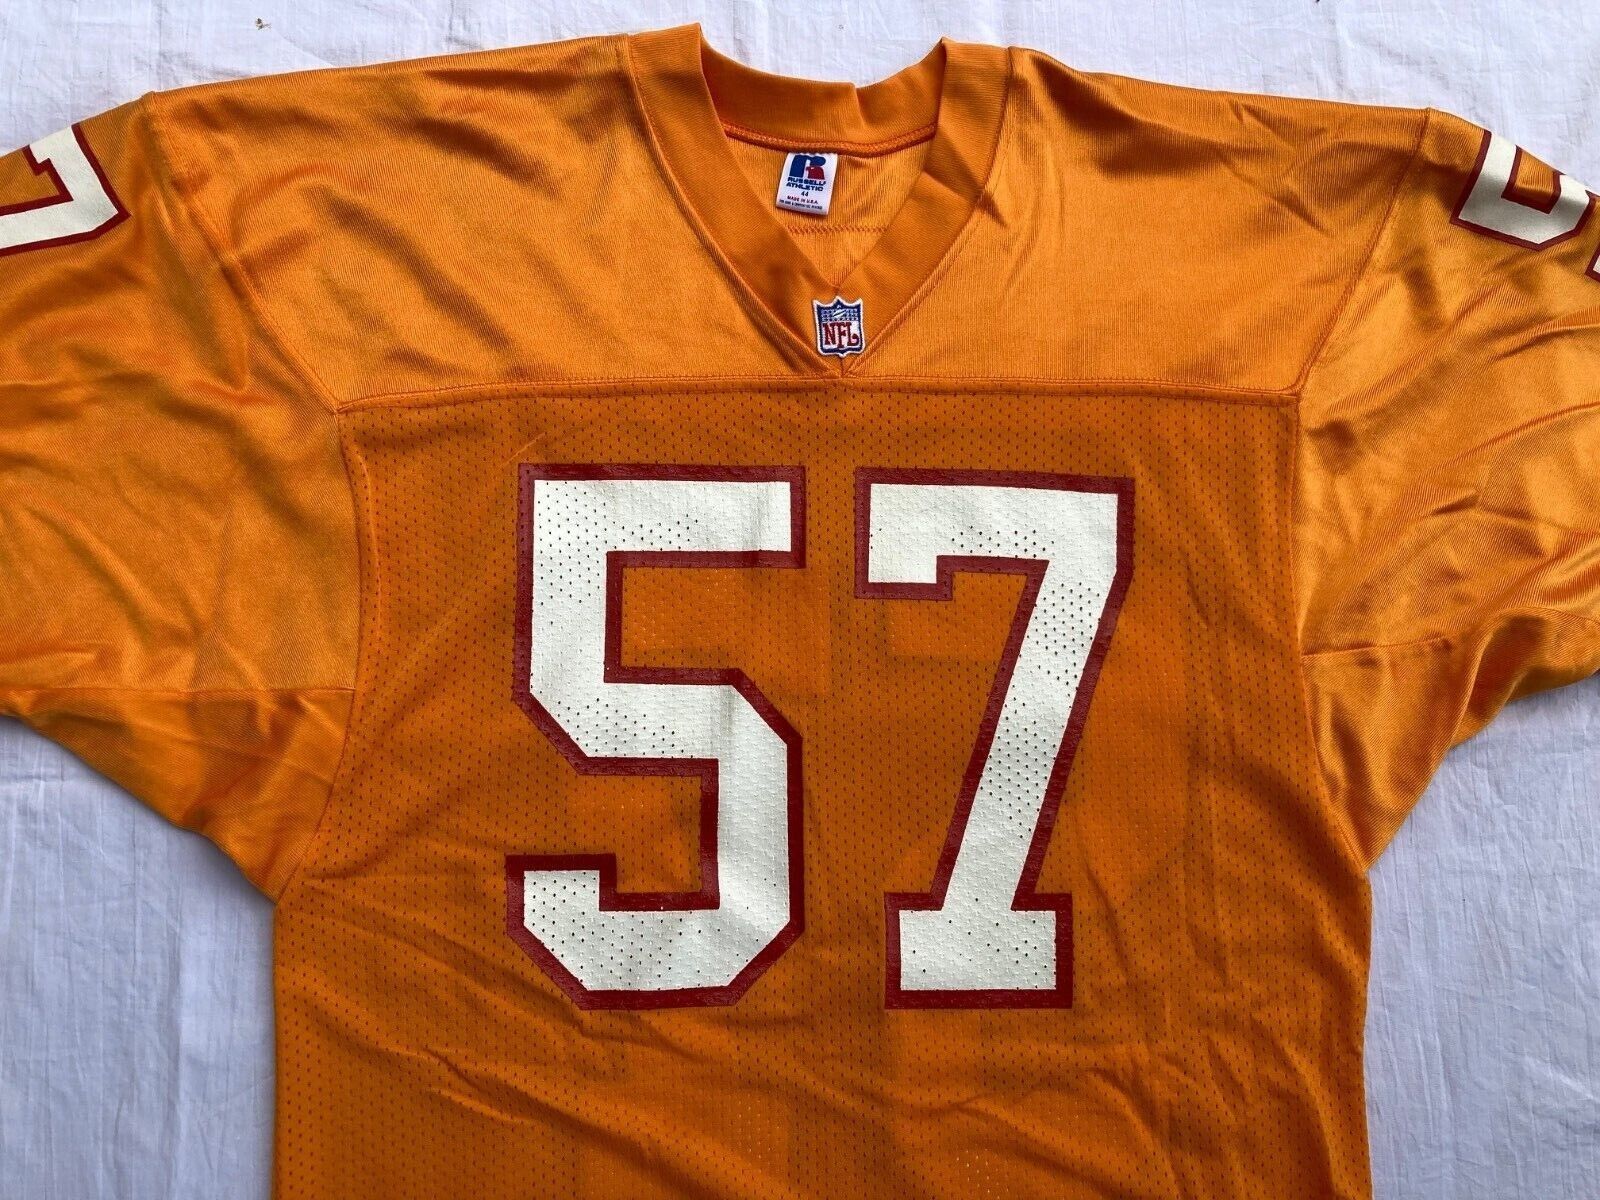 VTG TAMPA BAY BUCCANEERS JERSEY PRO LINE RUSSELL 44 NFL THROWBACK  CREAMSICLE